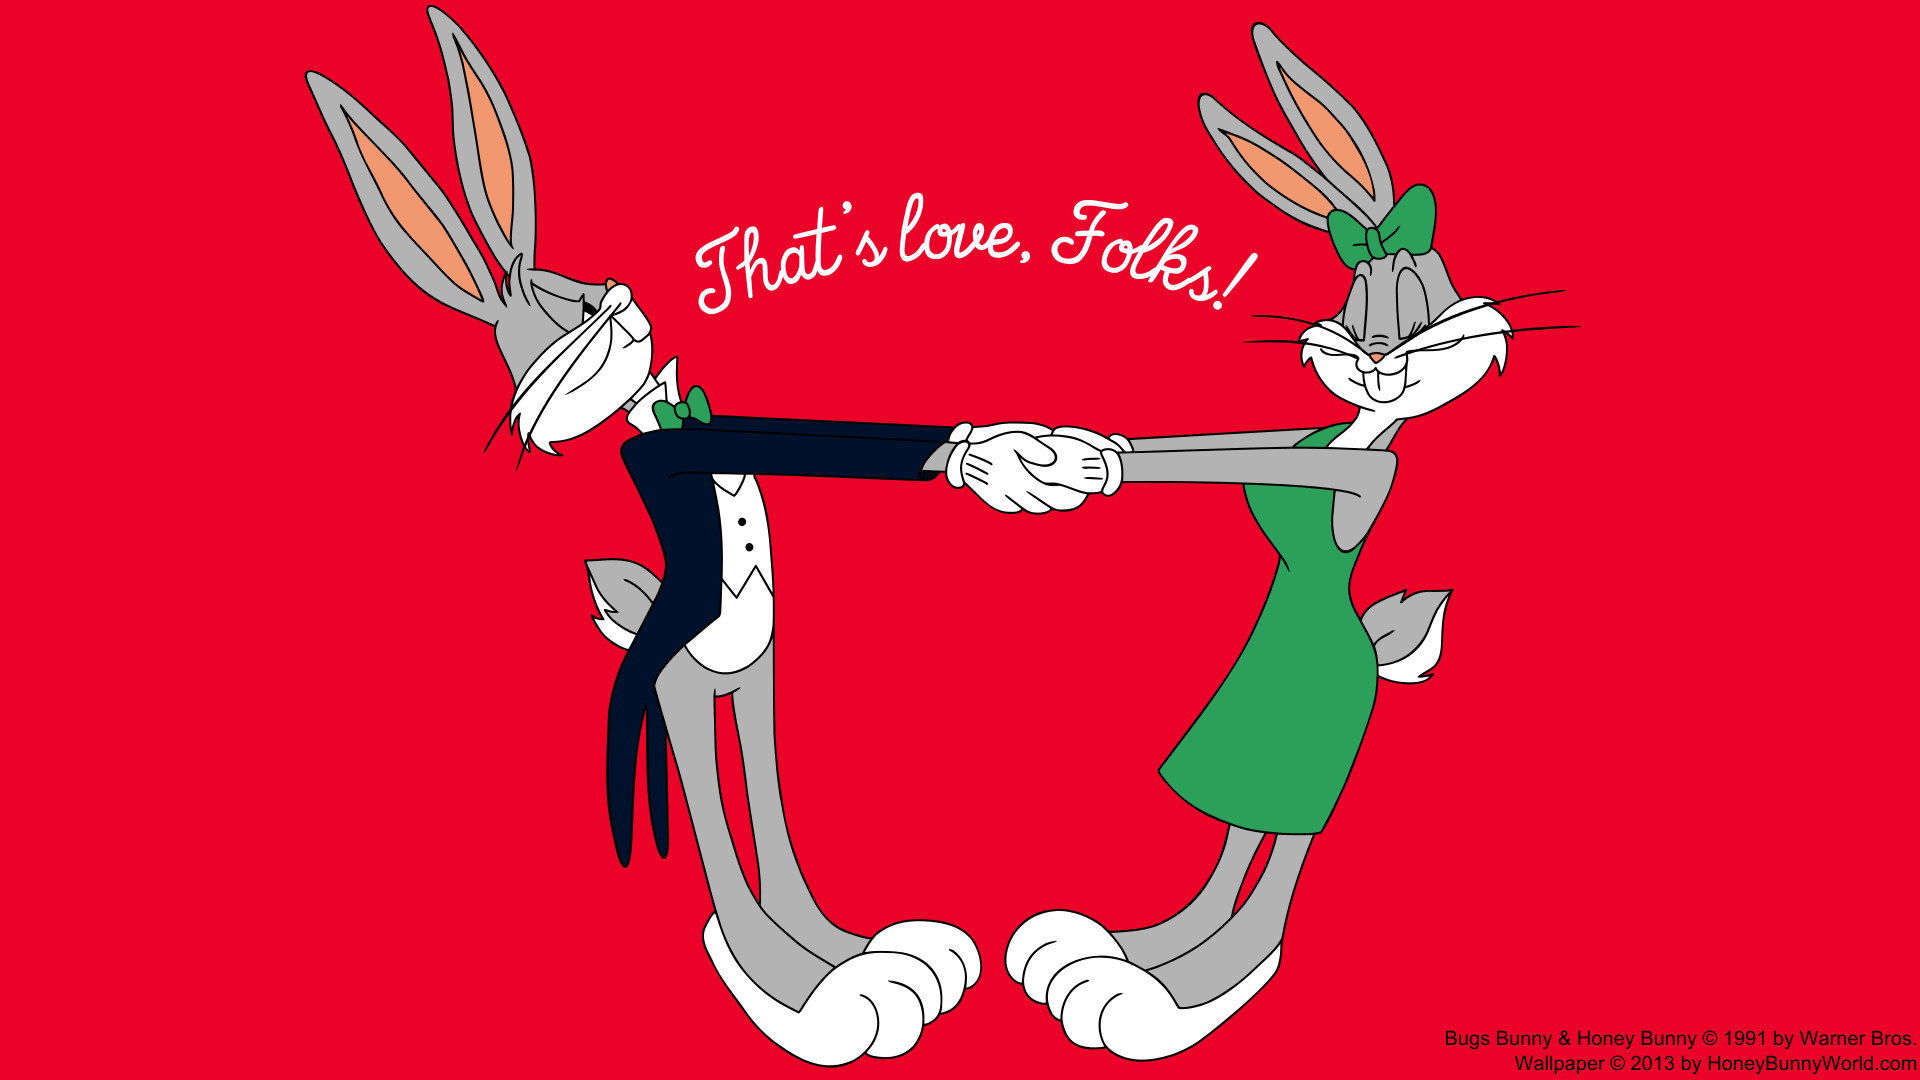 1920x1080 Everybunny loves some bunny, and Bugs Bunny loves Honey Bunny! And in this  wallpaper you can see how sincere and true their love is.